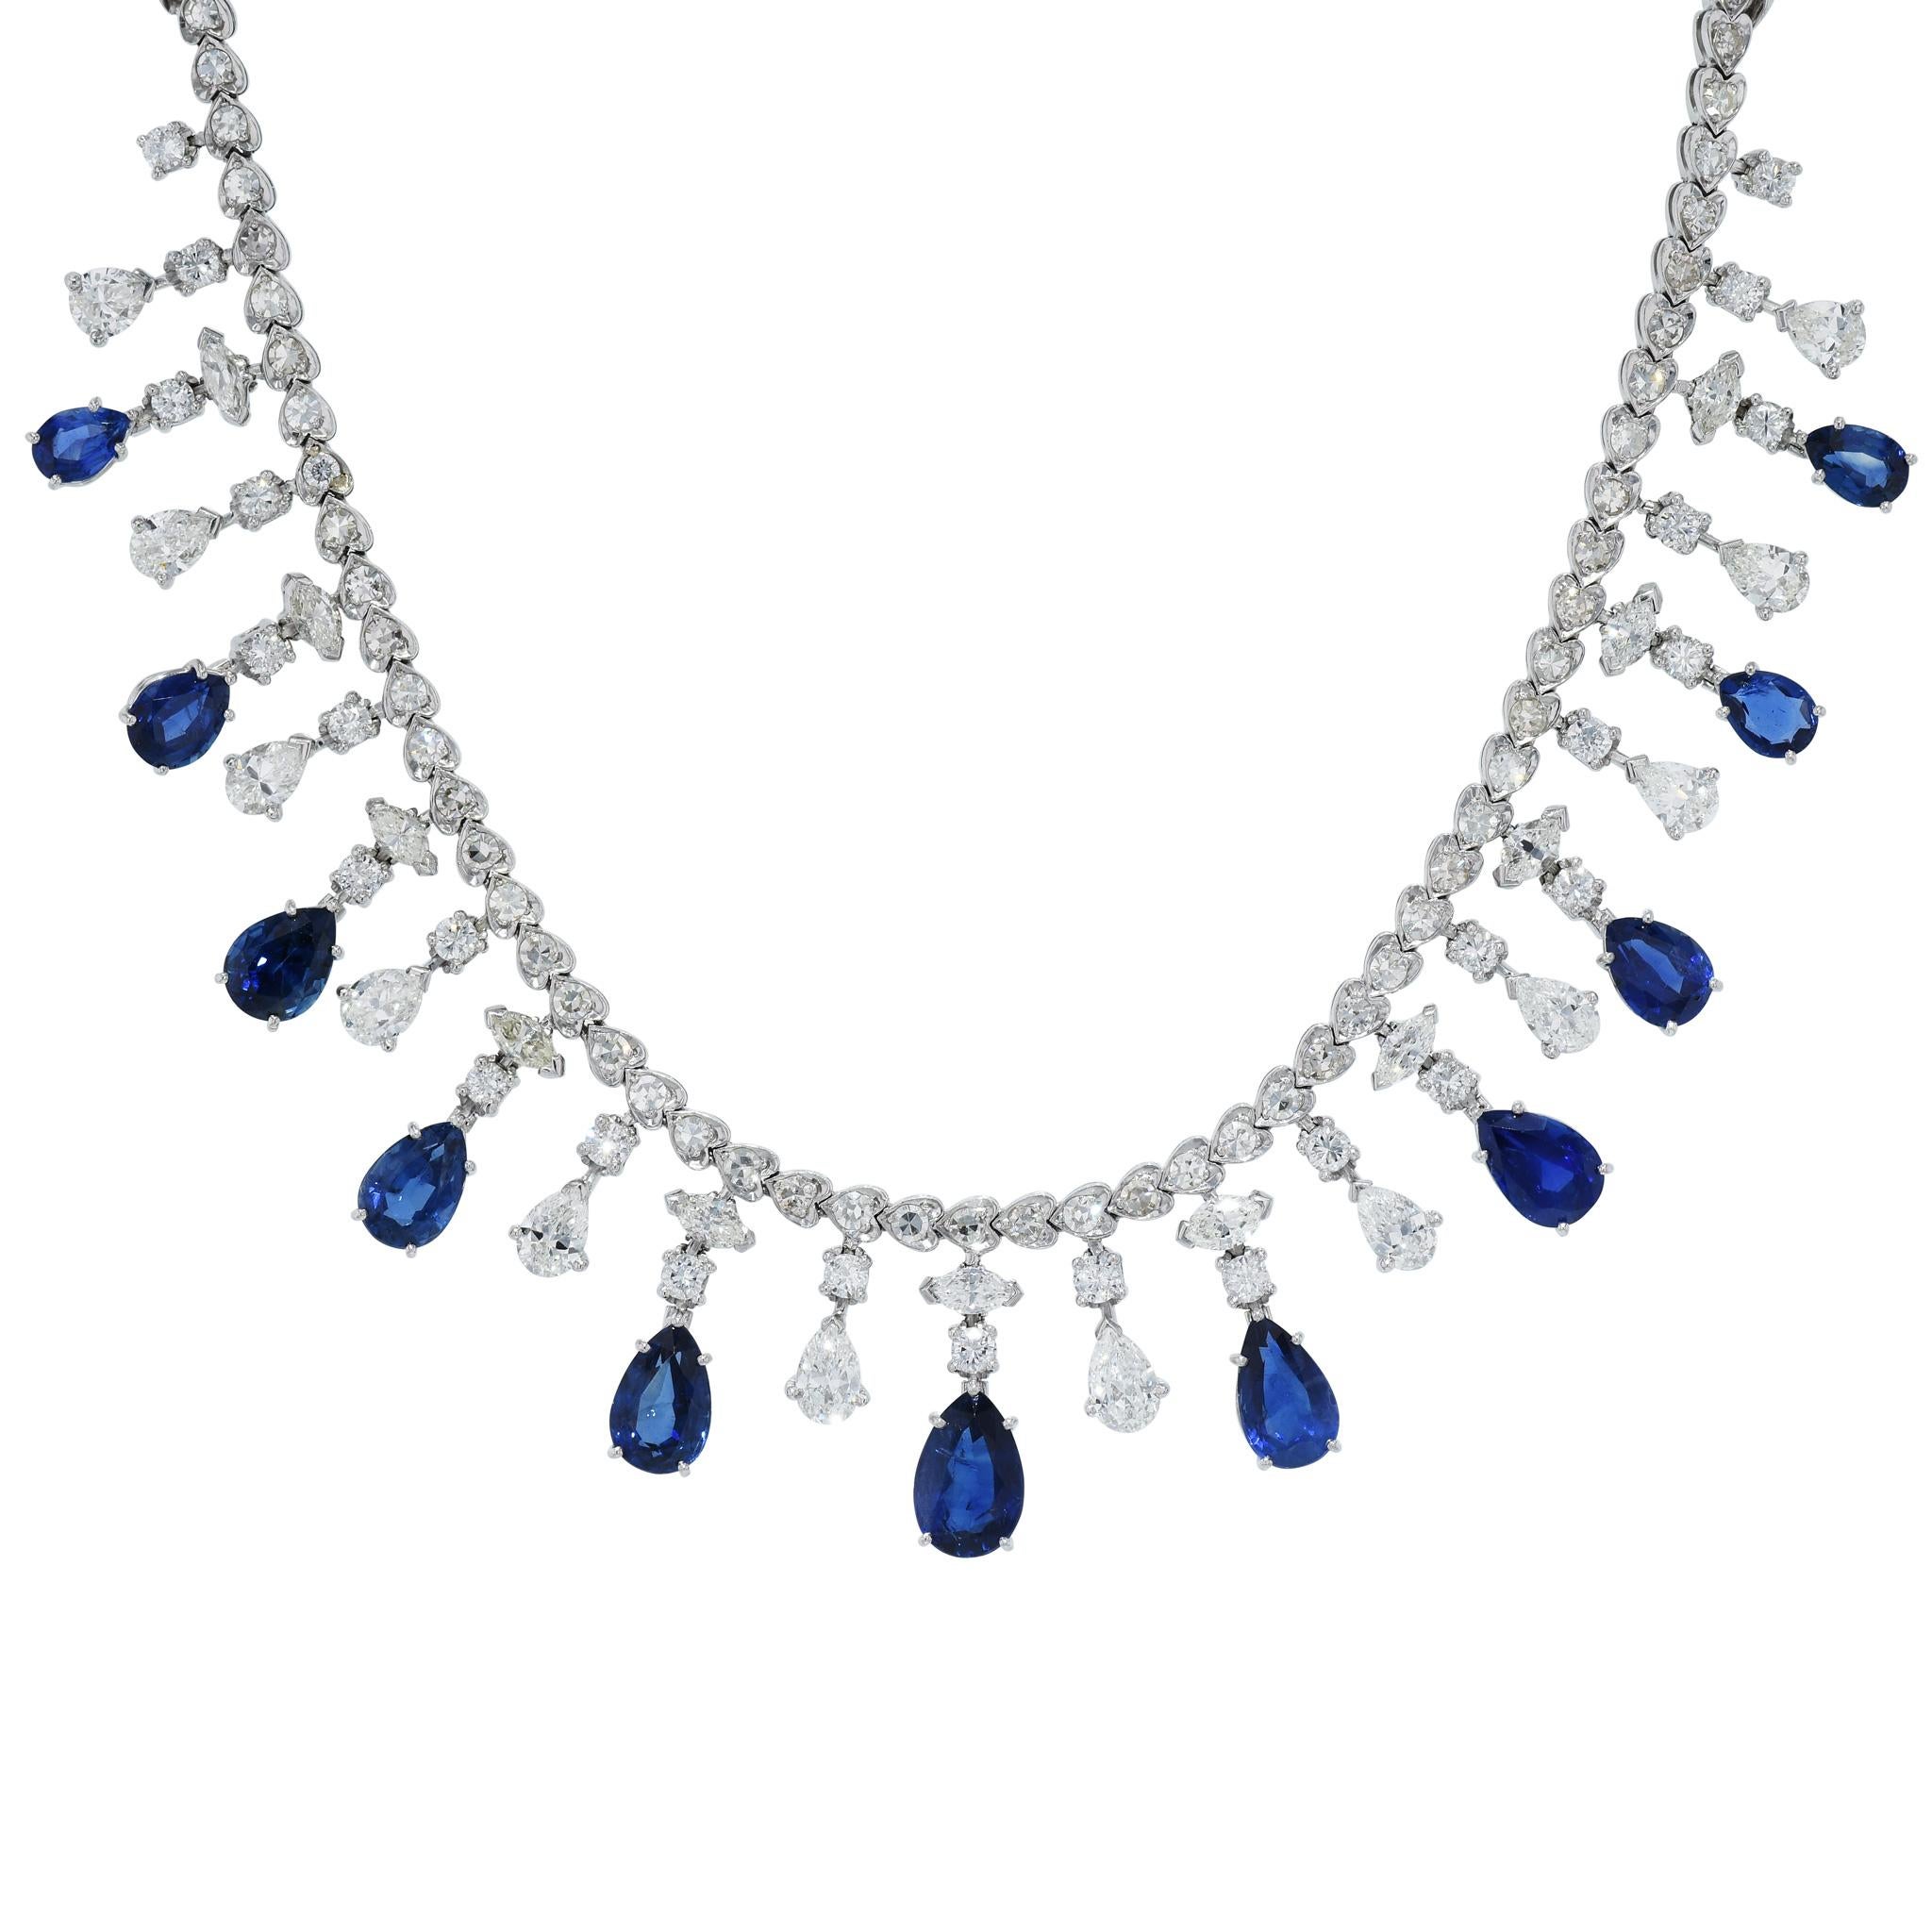 This stunning diamond and sapphire bib-style necklace is an awe-inspiring piece with 11 pear-shaped blue sapphires, 12 pear shaped diamonds, along with round, baguette and marquise cut diamonds.

This piece of art measures 17 inches in length. 
In